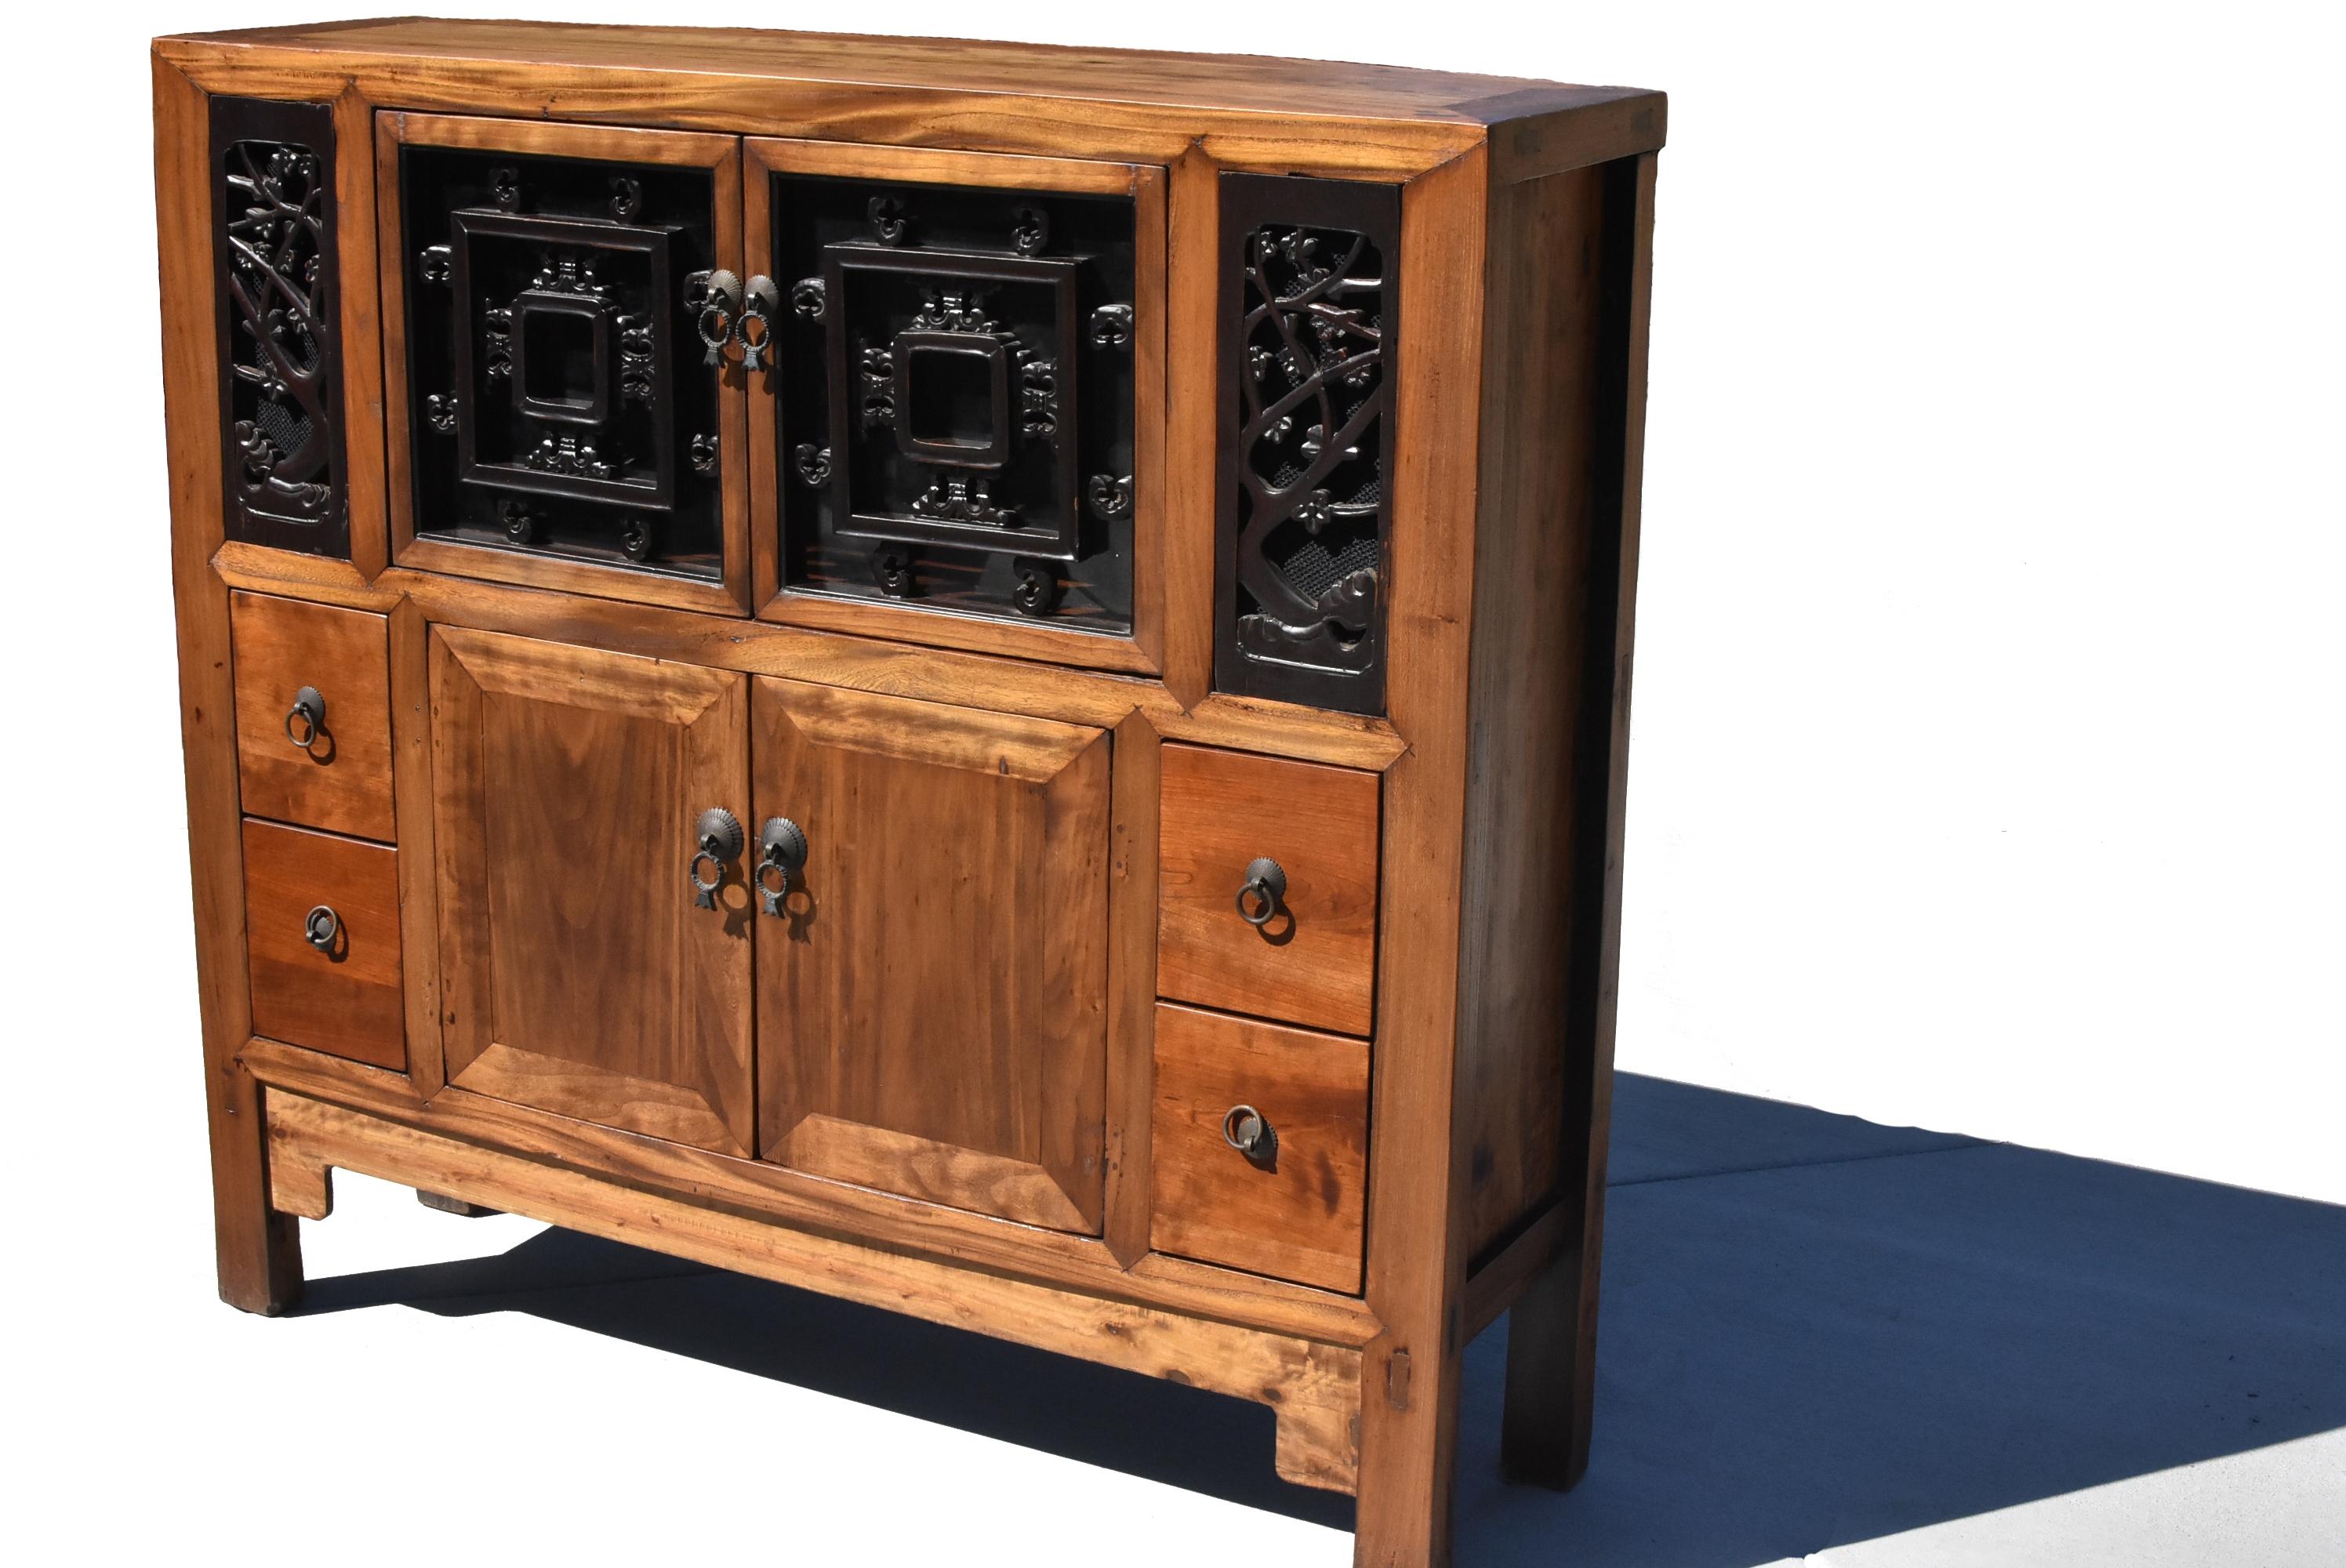 A beautiful Chinese book cabinet, made of solid wood in mitered tenon and mortise construction. Top doors and side panels feature carved antique screens backed by mesh and glass. The carvings depict plum tree blossoms and butterflies. The bottom